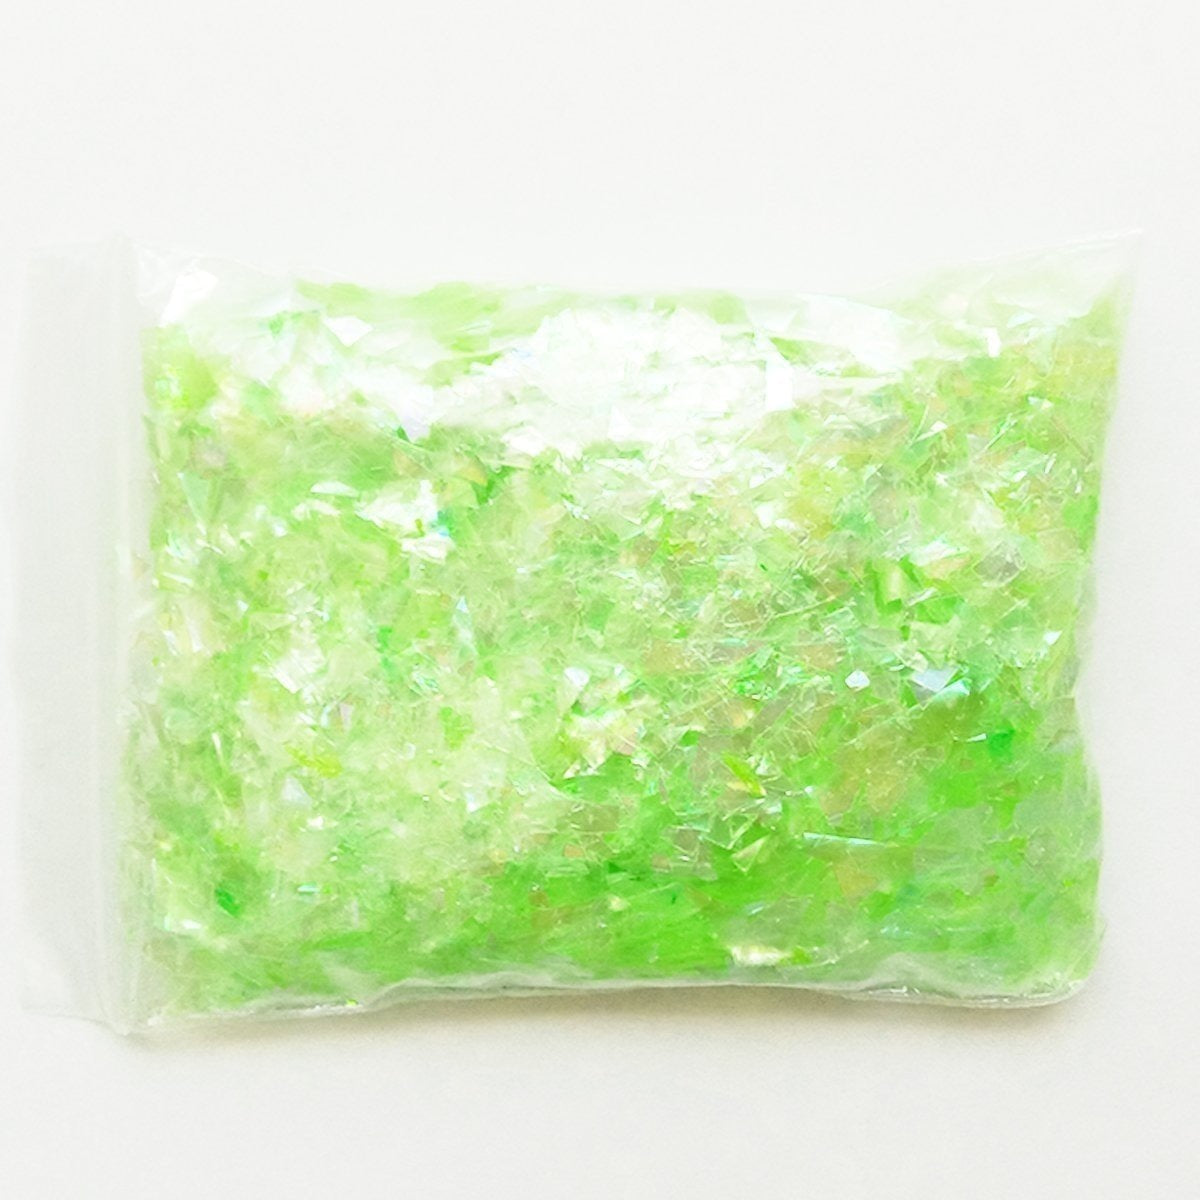 Holographic Nail Decoration Flakes Glitter Diy Art 3D Sequin Green (W/ Touch Of Yellow) -